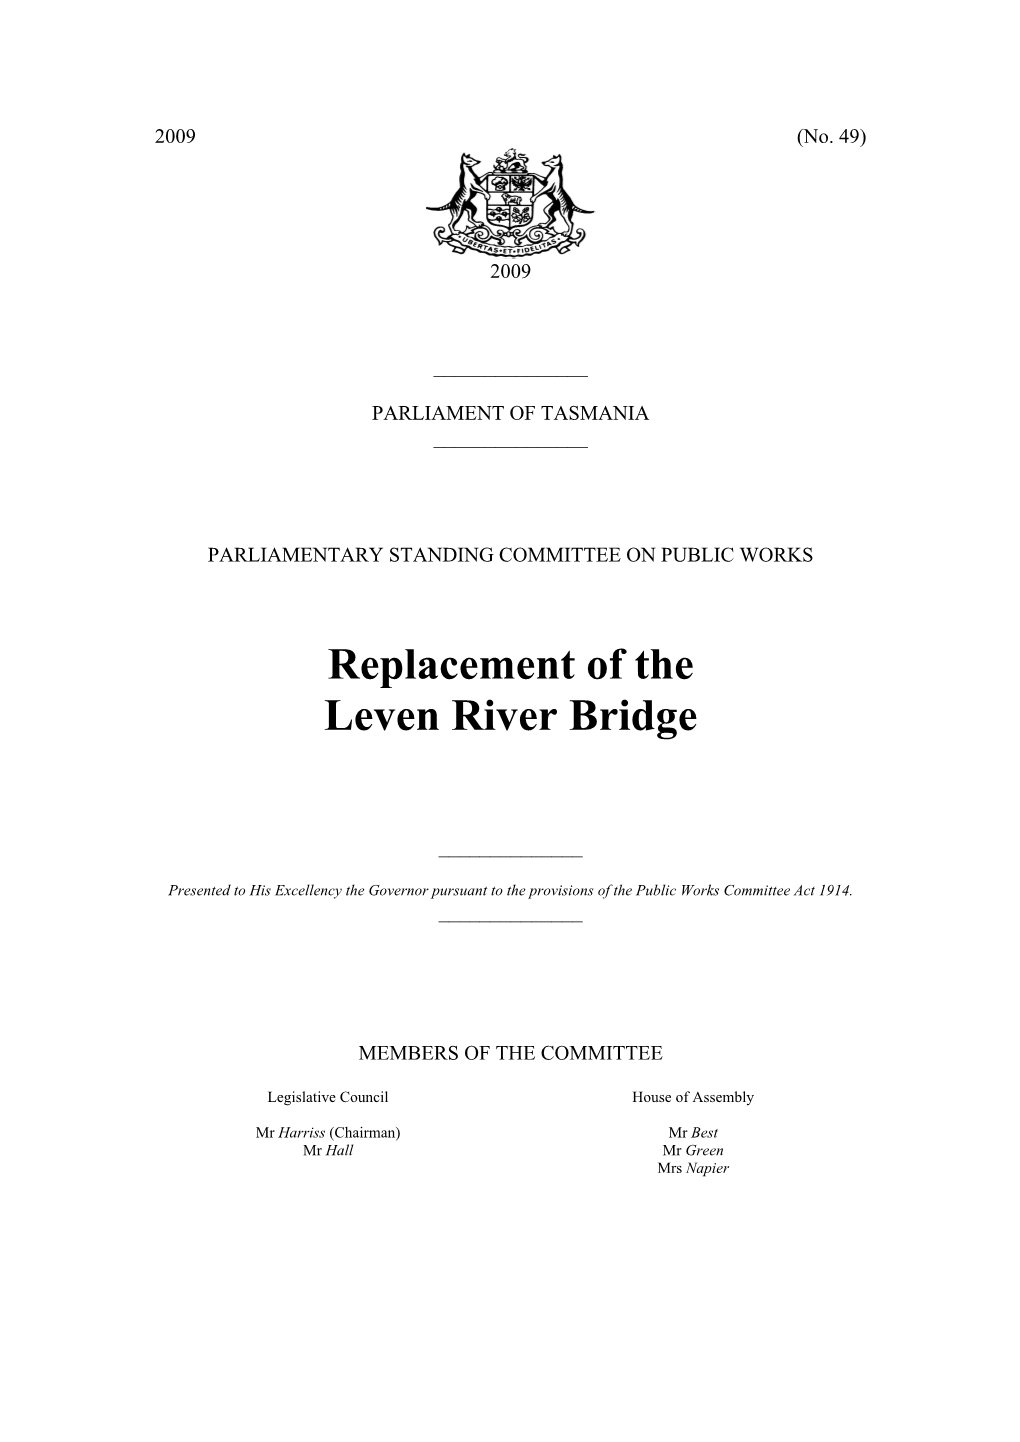 Replacement of the Leven River Bridge